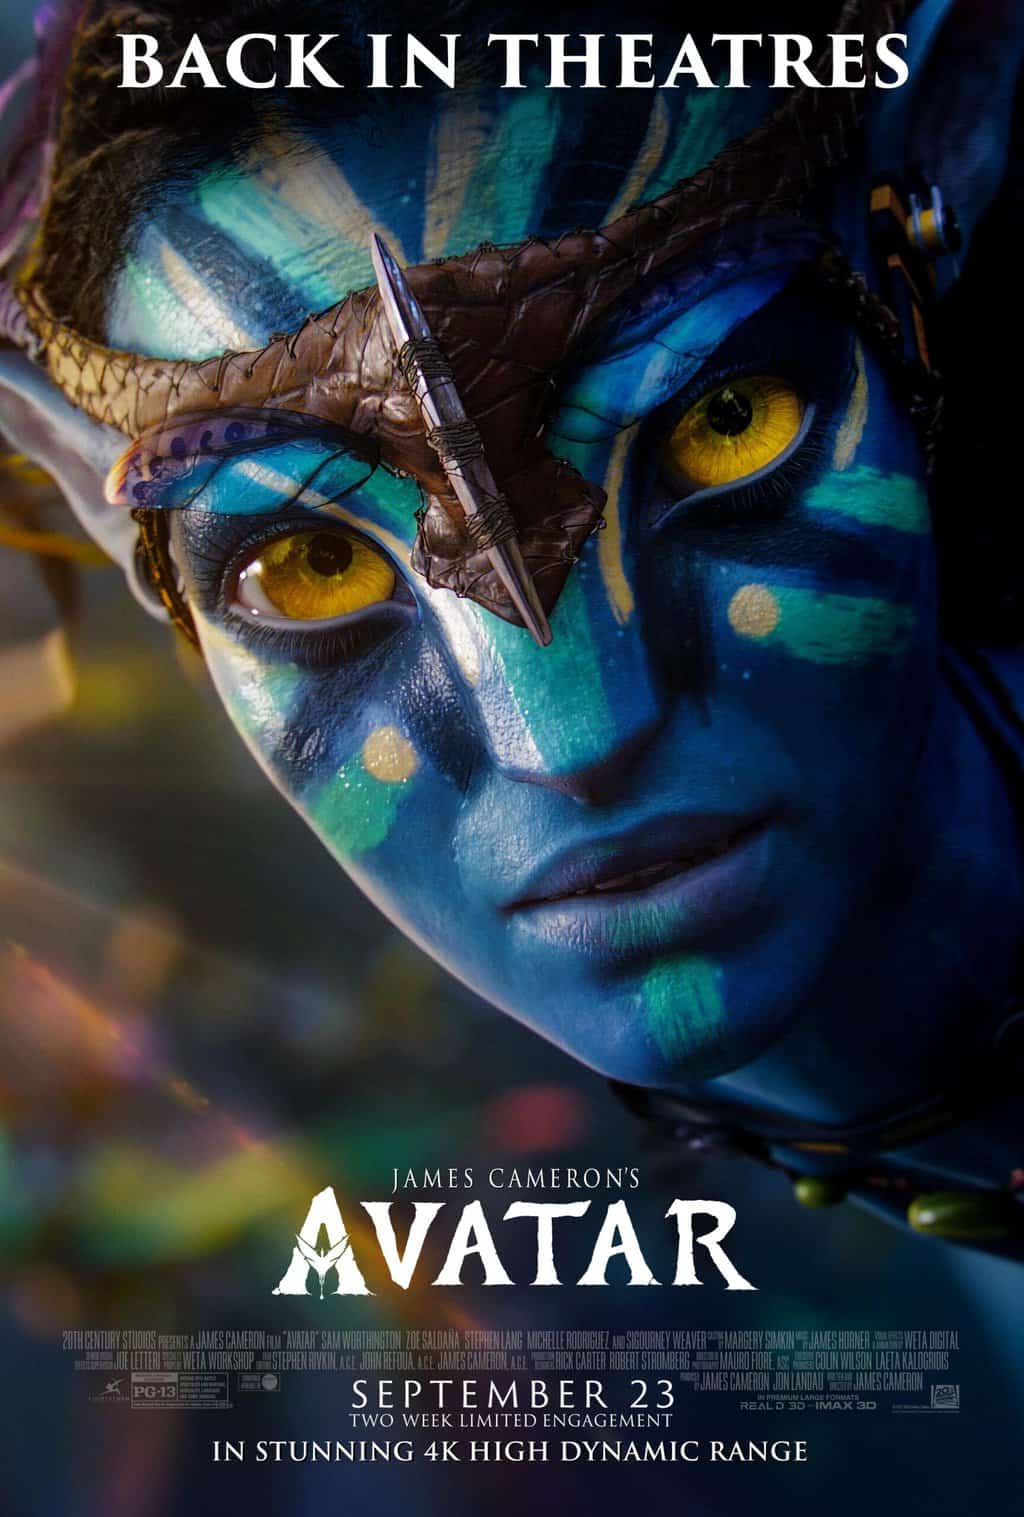 Avatar movie poster. What is the age rating of Avatar?